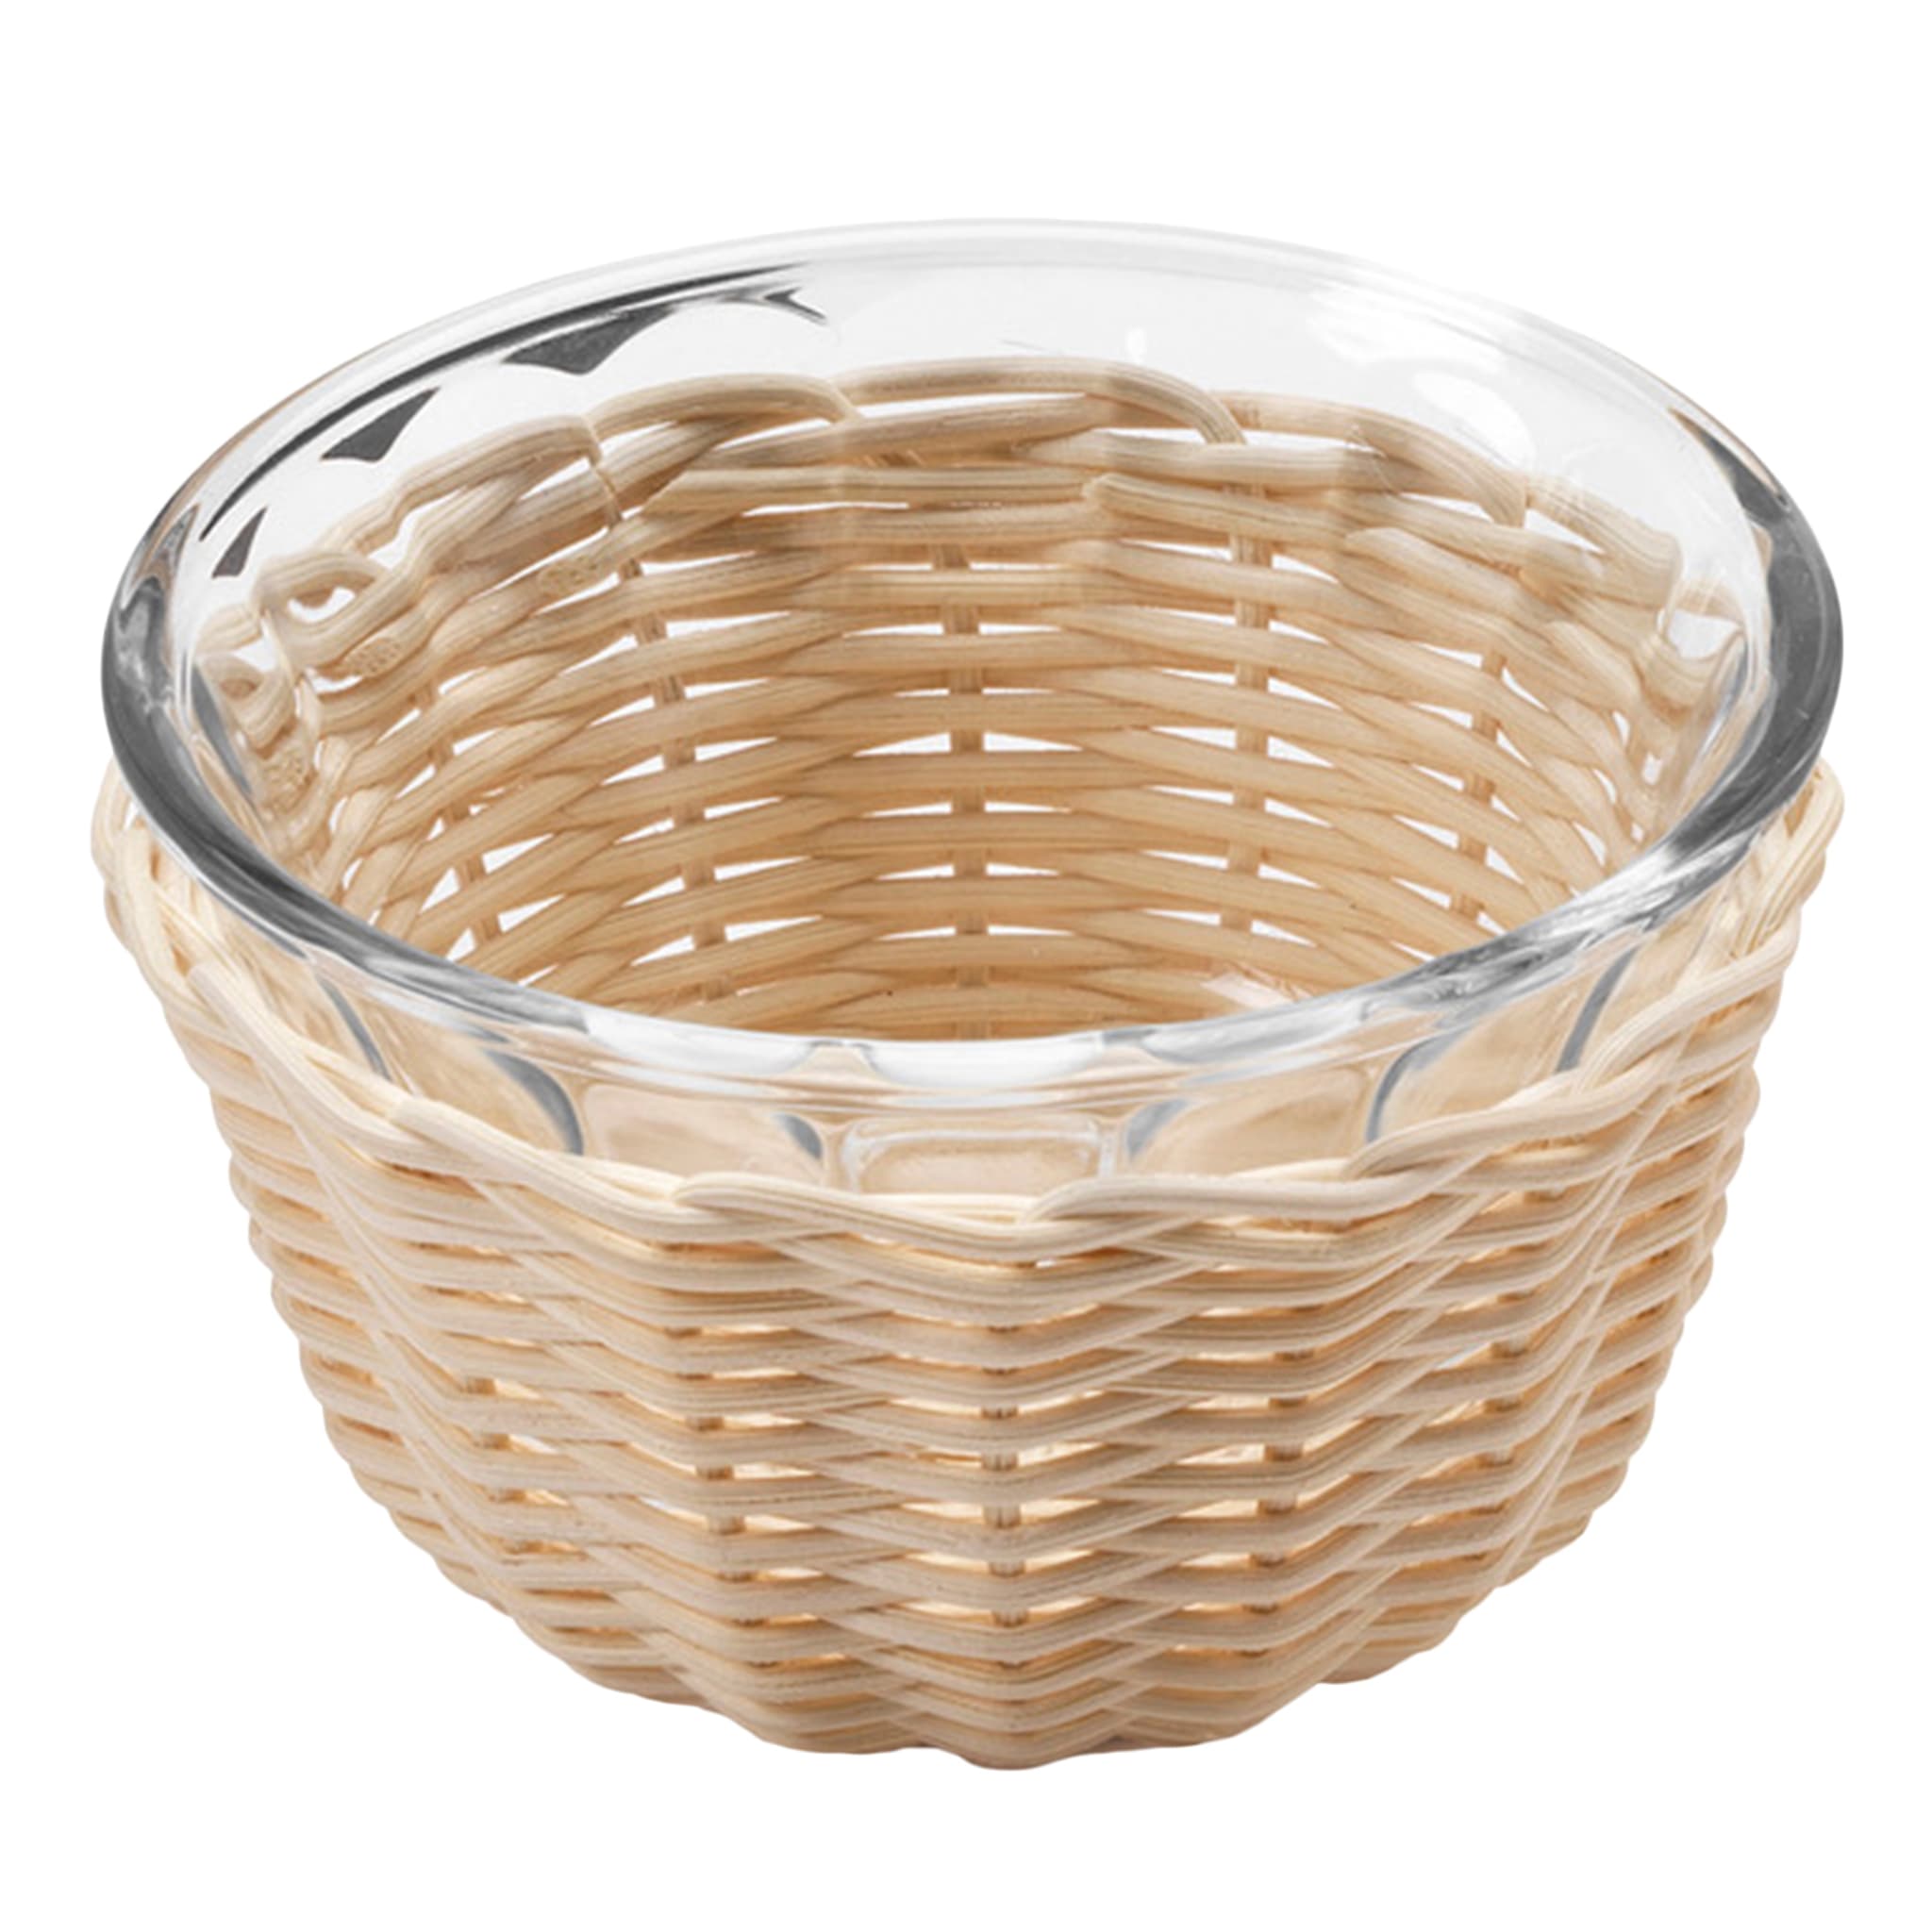 Campanula Cup with Wicker Basket - Main view